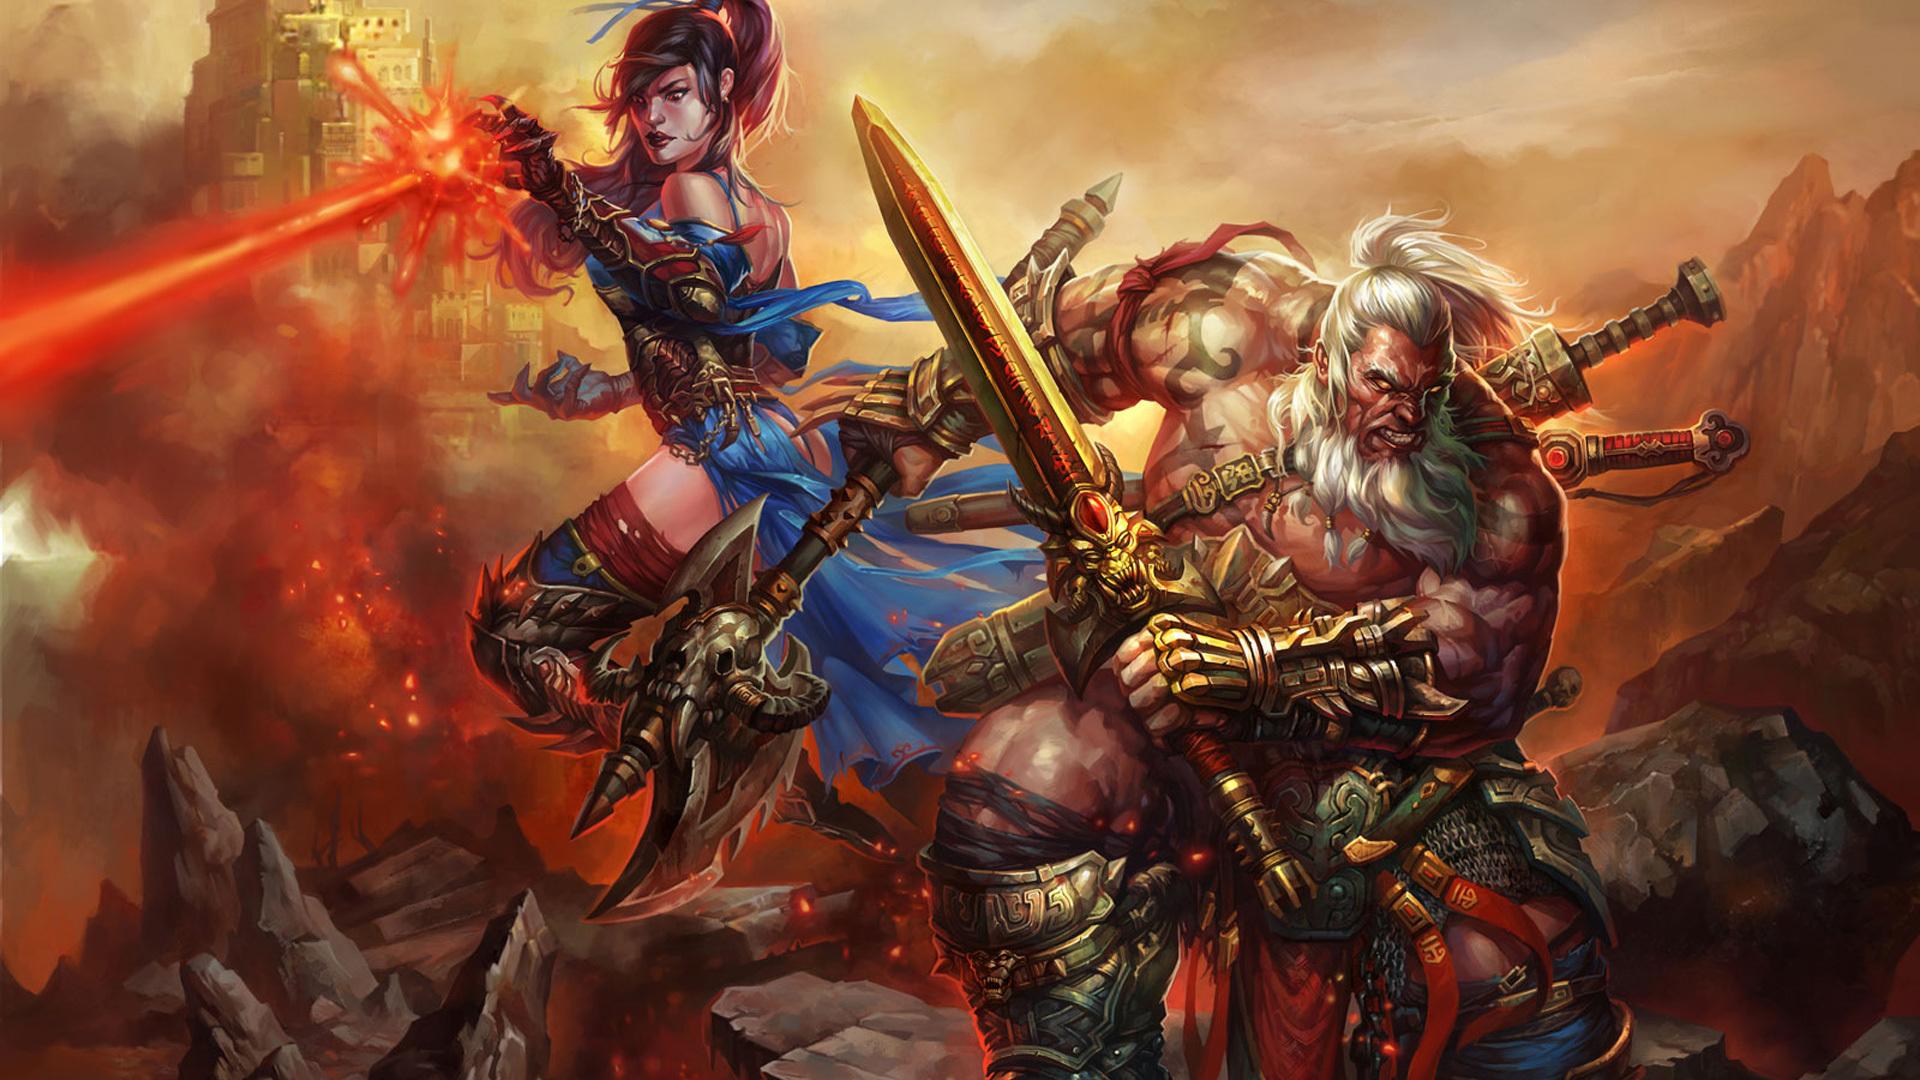 Diablo III: barbarian and mage wallpaper and image